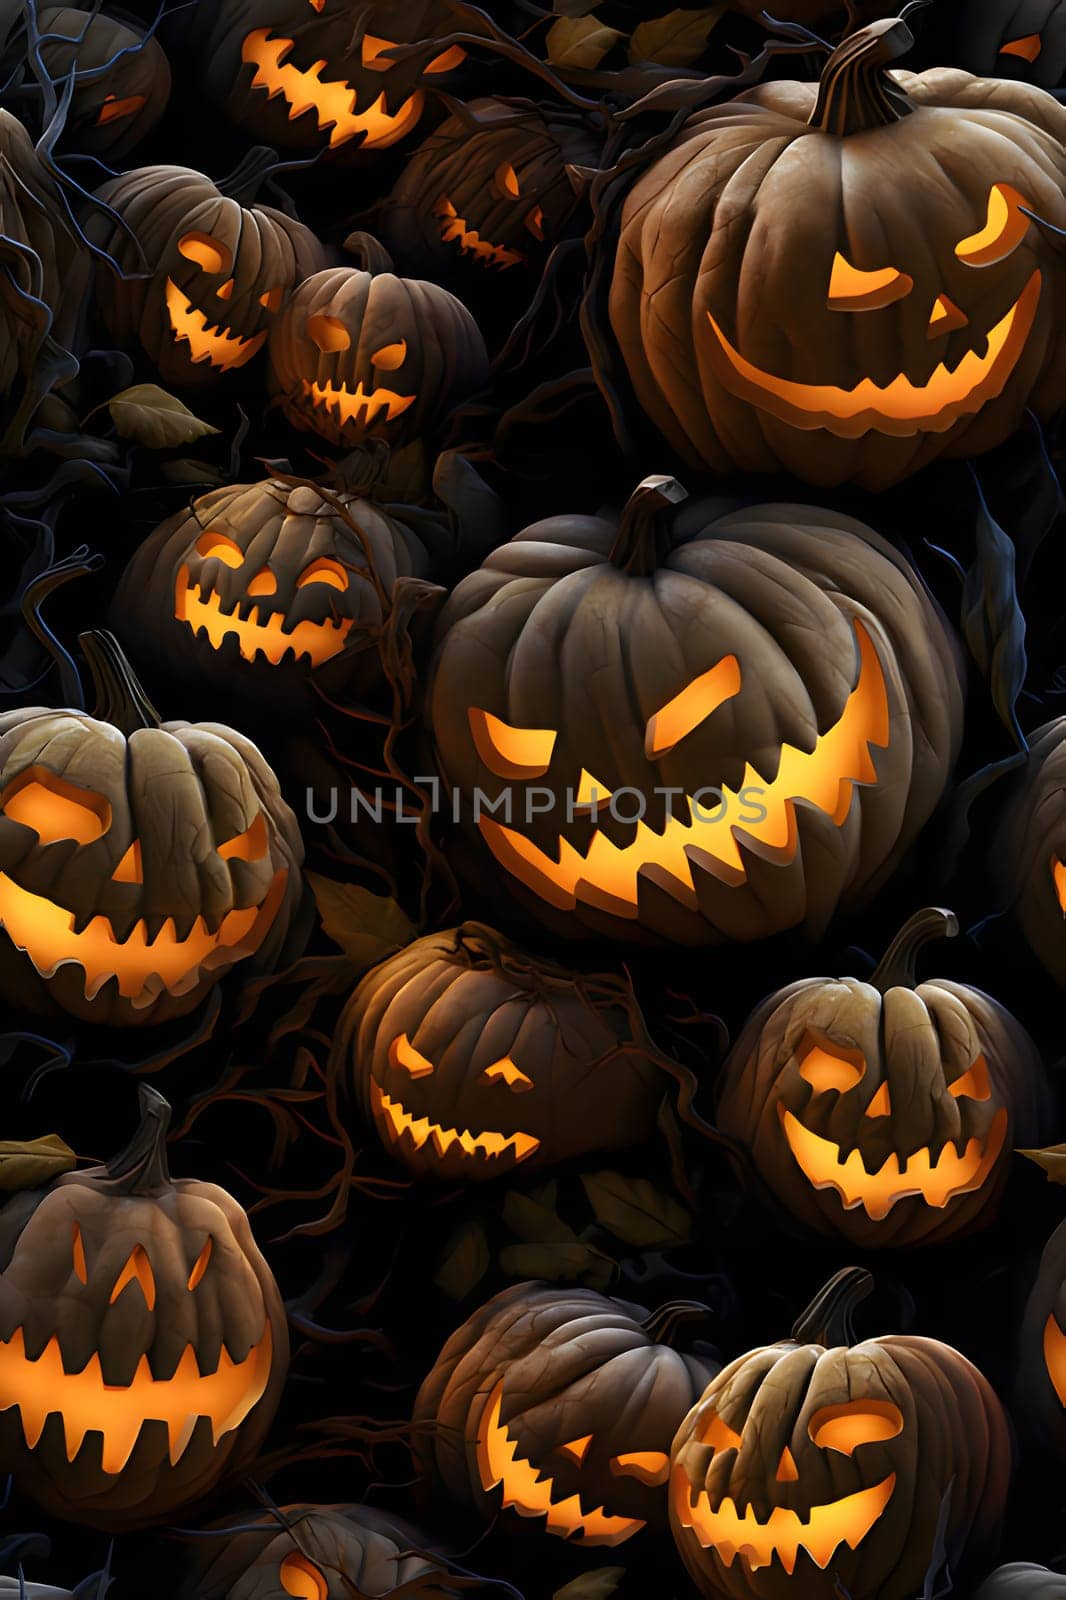 Luminously eyes jack-o-lantern pumpkins as abstract background, wallpaper, banner, texture design with pattern - vector. Black colors. by ThemesS